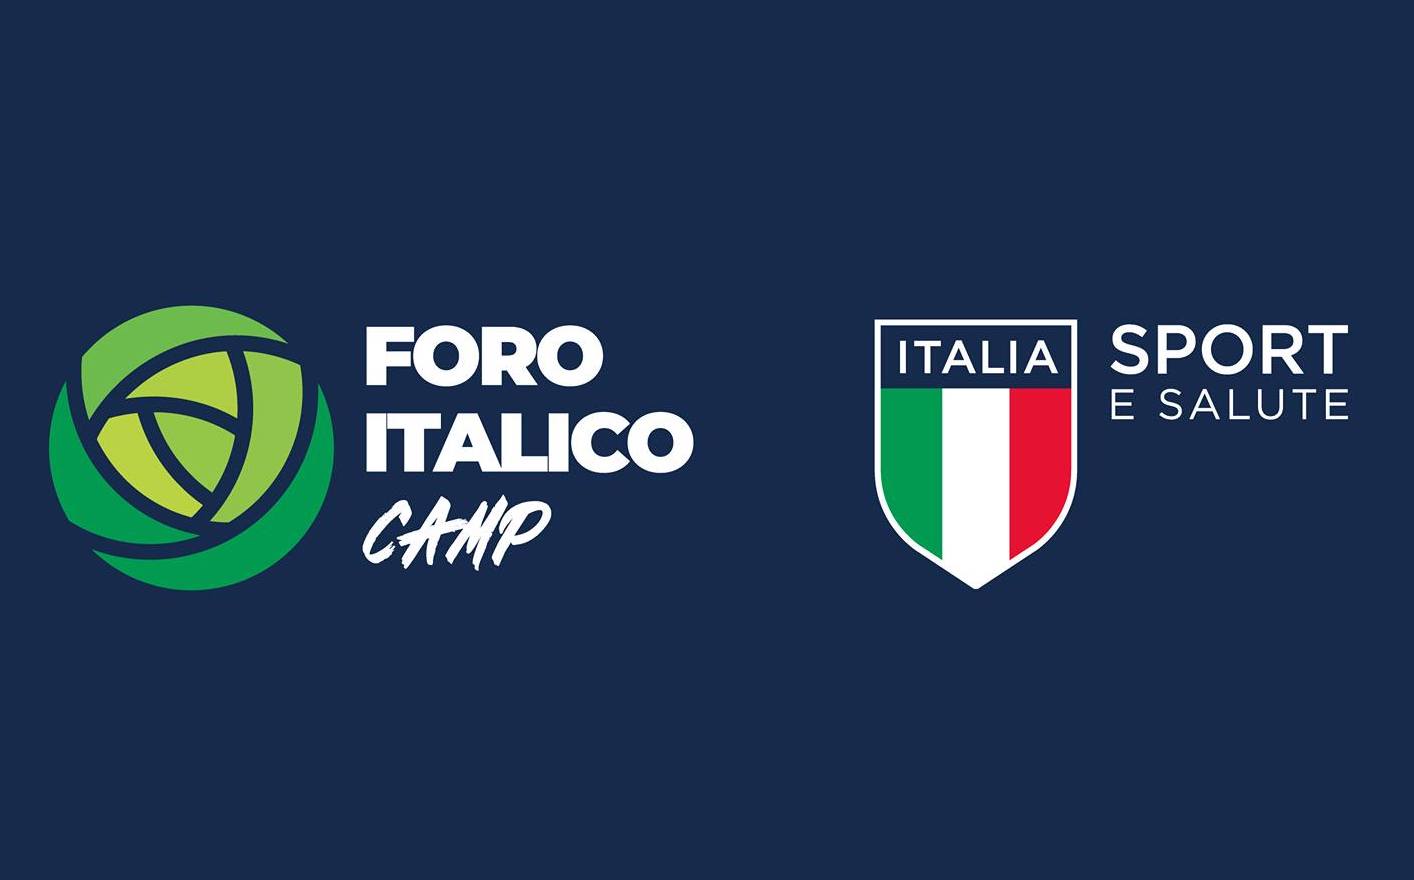 Foro Italico Camp 2022 e Special Week